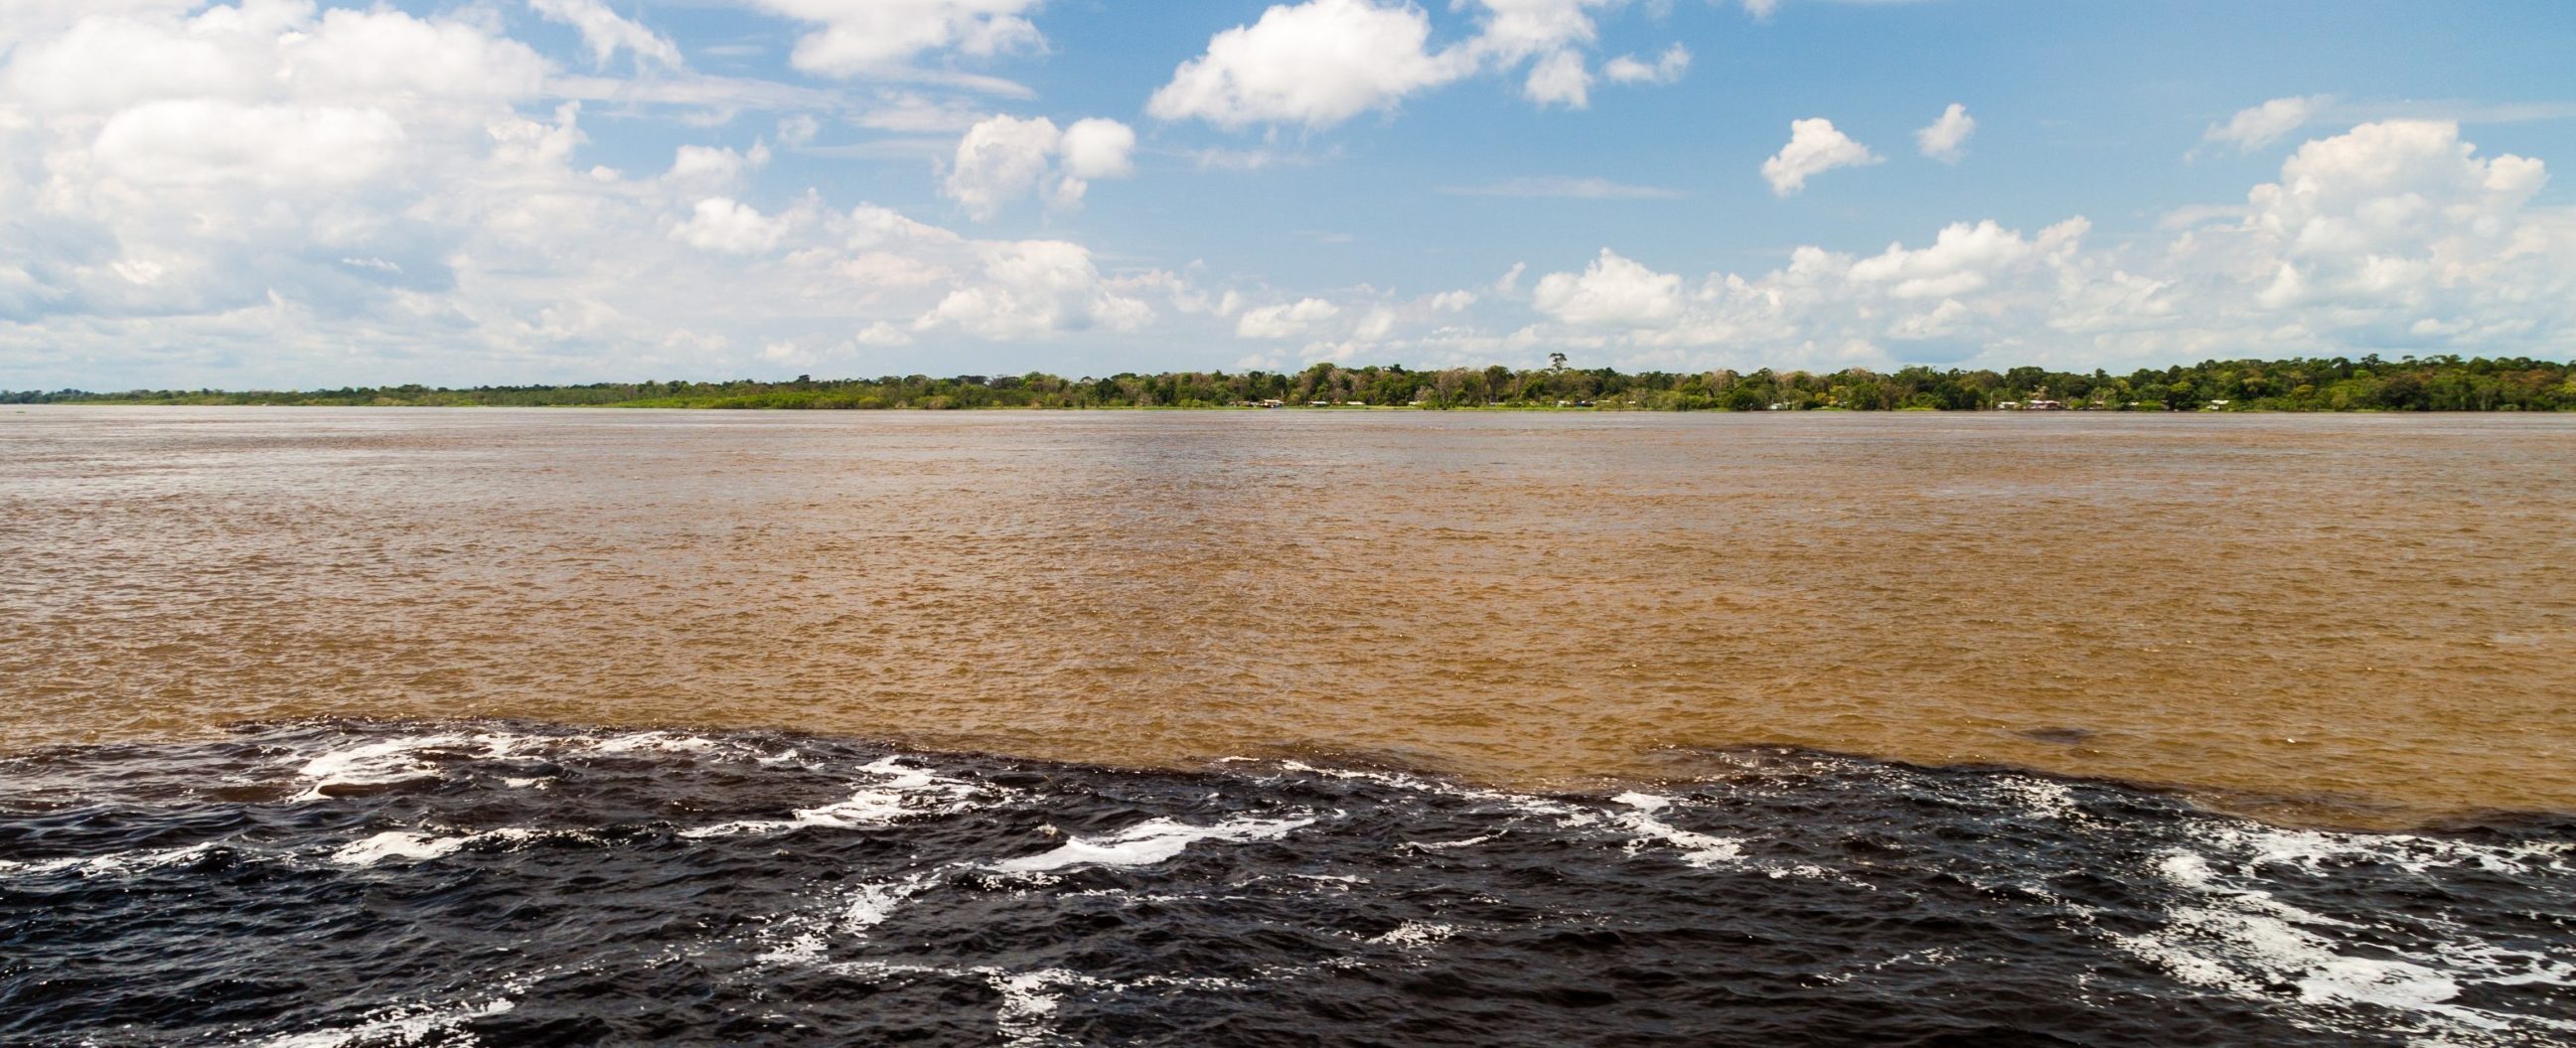 The mythical encounter of the waters, where the Solimoes and Rio Negro meet, but never mix. 